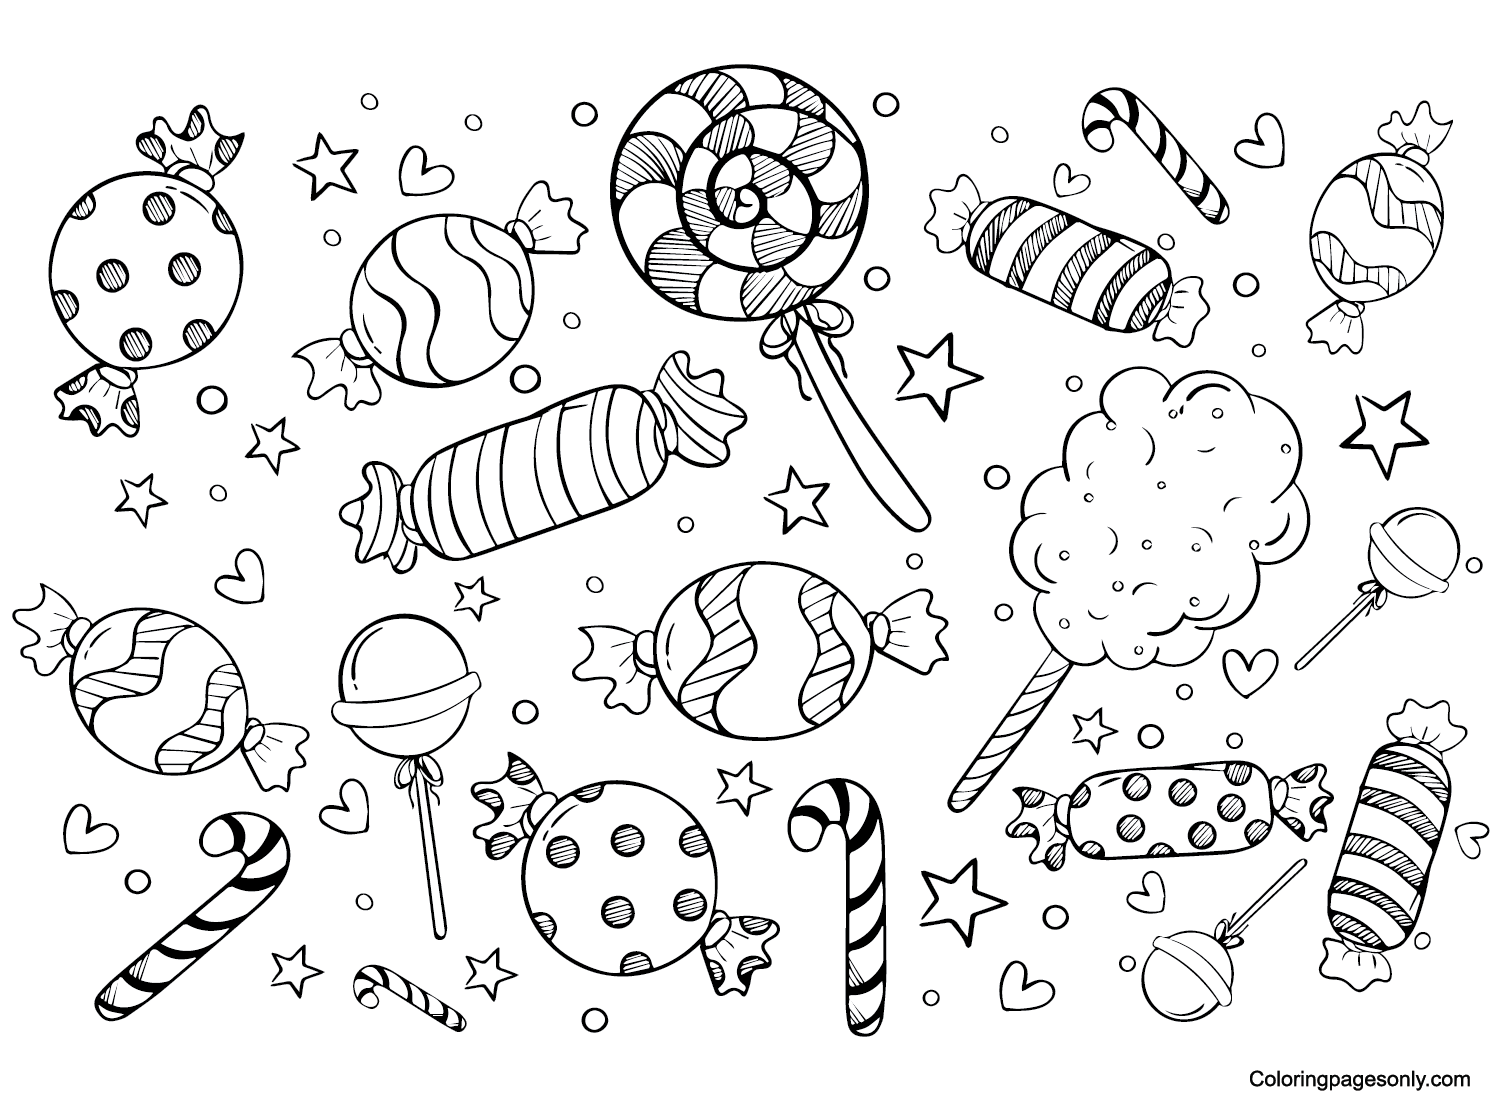 Candyland Decorations Coloring Page